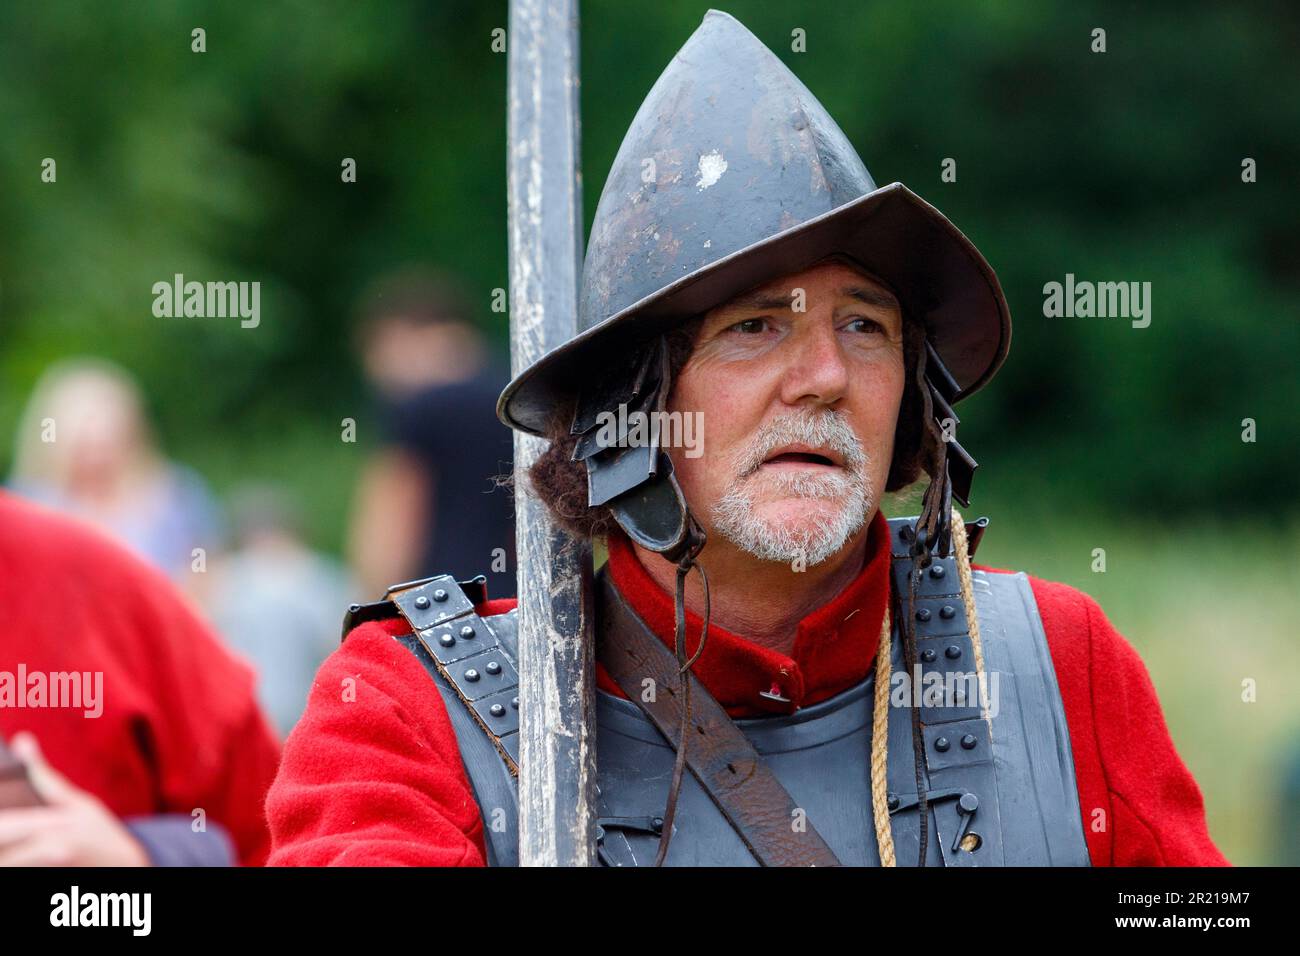 English Civil War Society members take part in the re-enactment of the Battle of Chippenham.The battle took place in 1643 during the English civil war Stock Photo